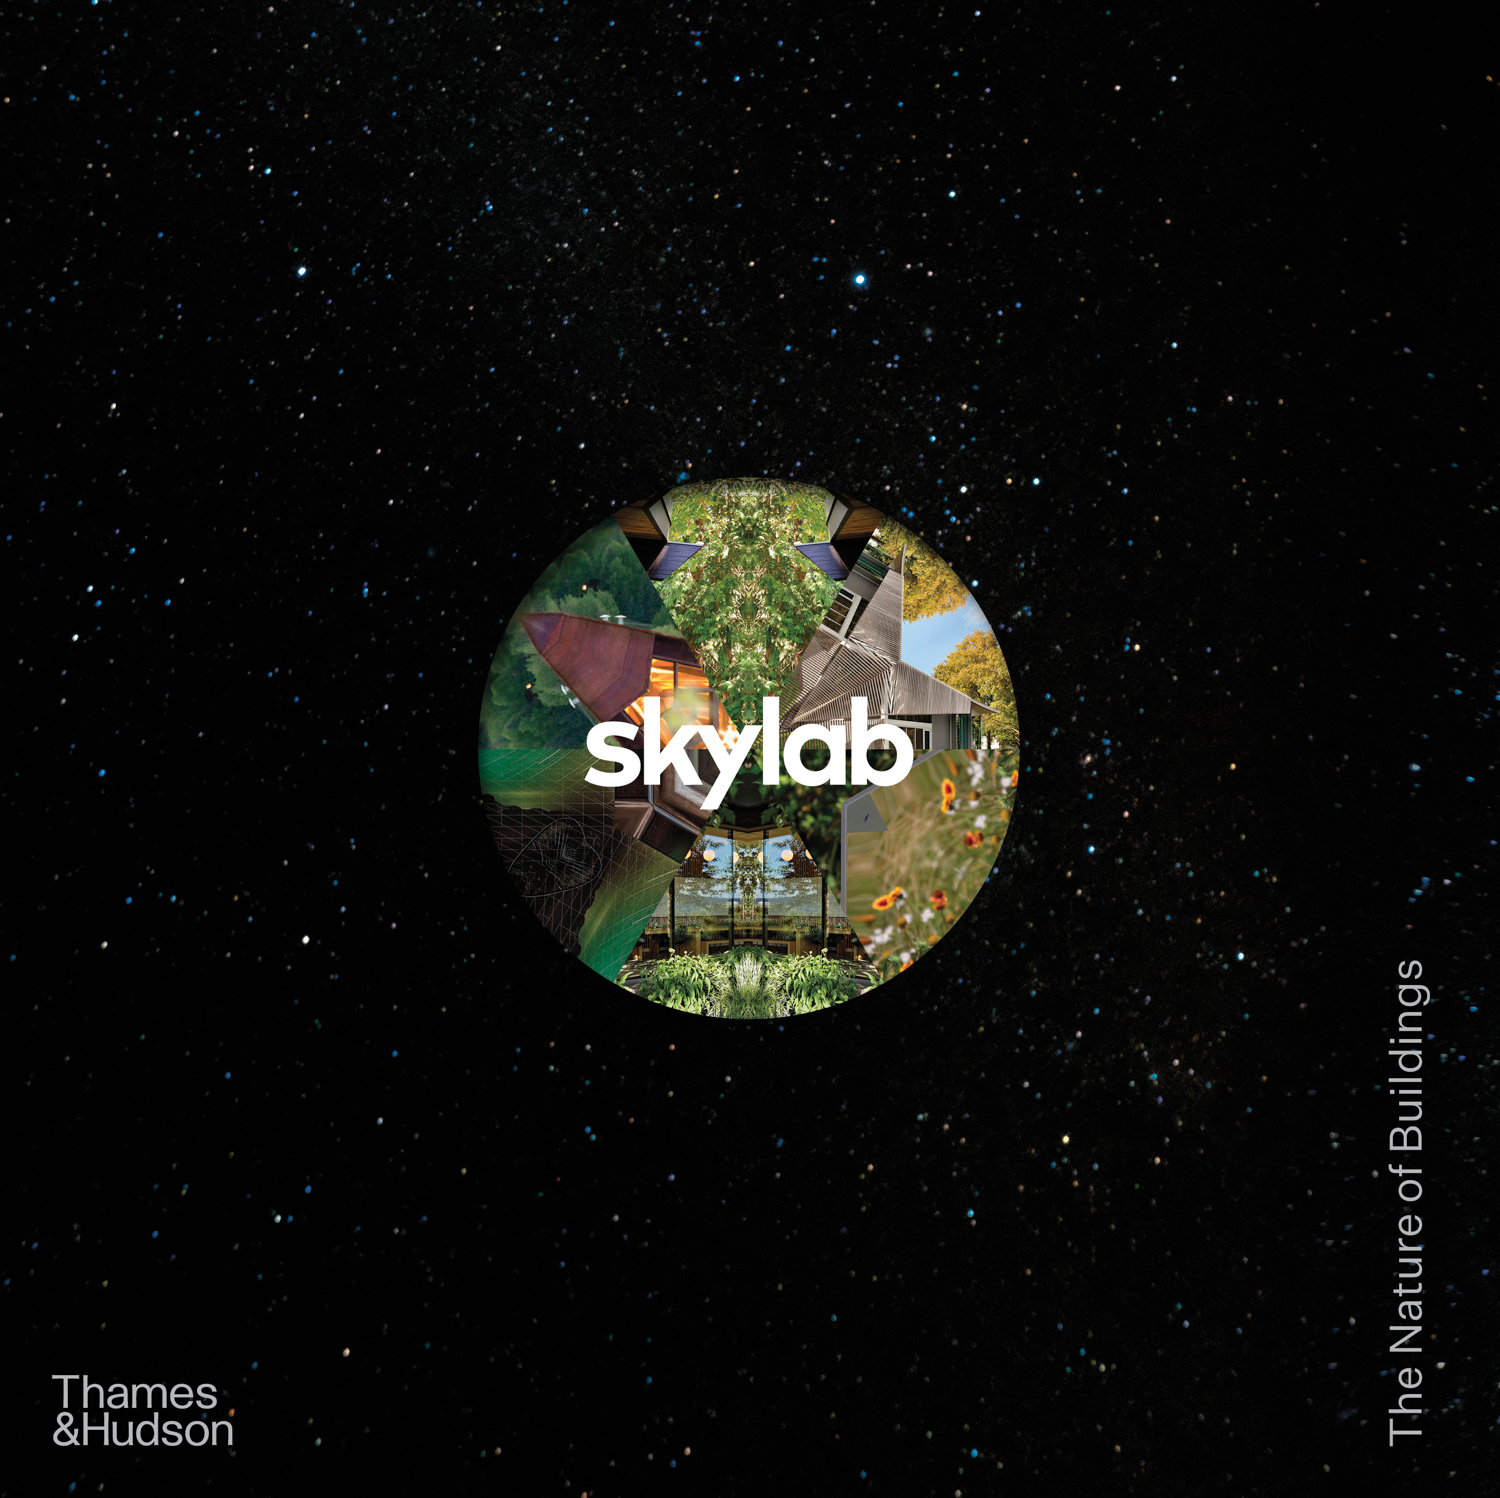 Cover of Skylab architecture firm's book "Skylab: The Nature of Buildings." 